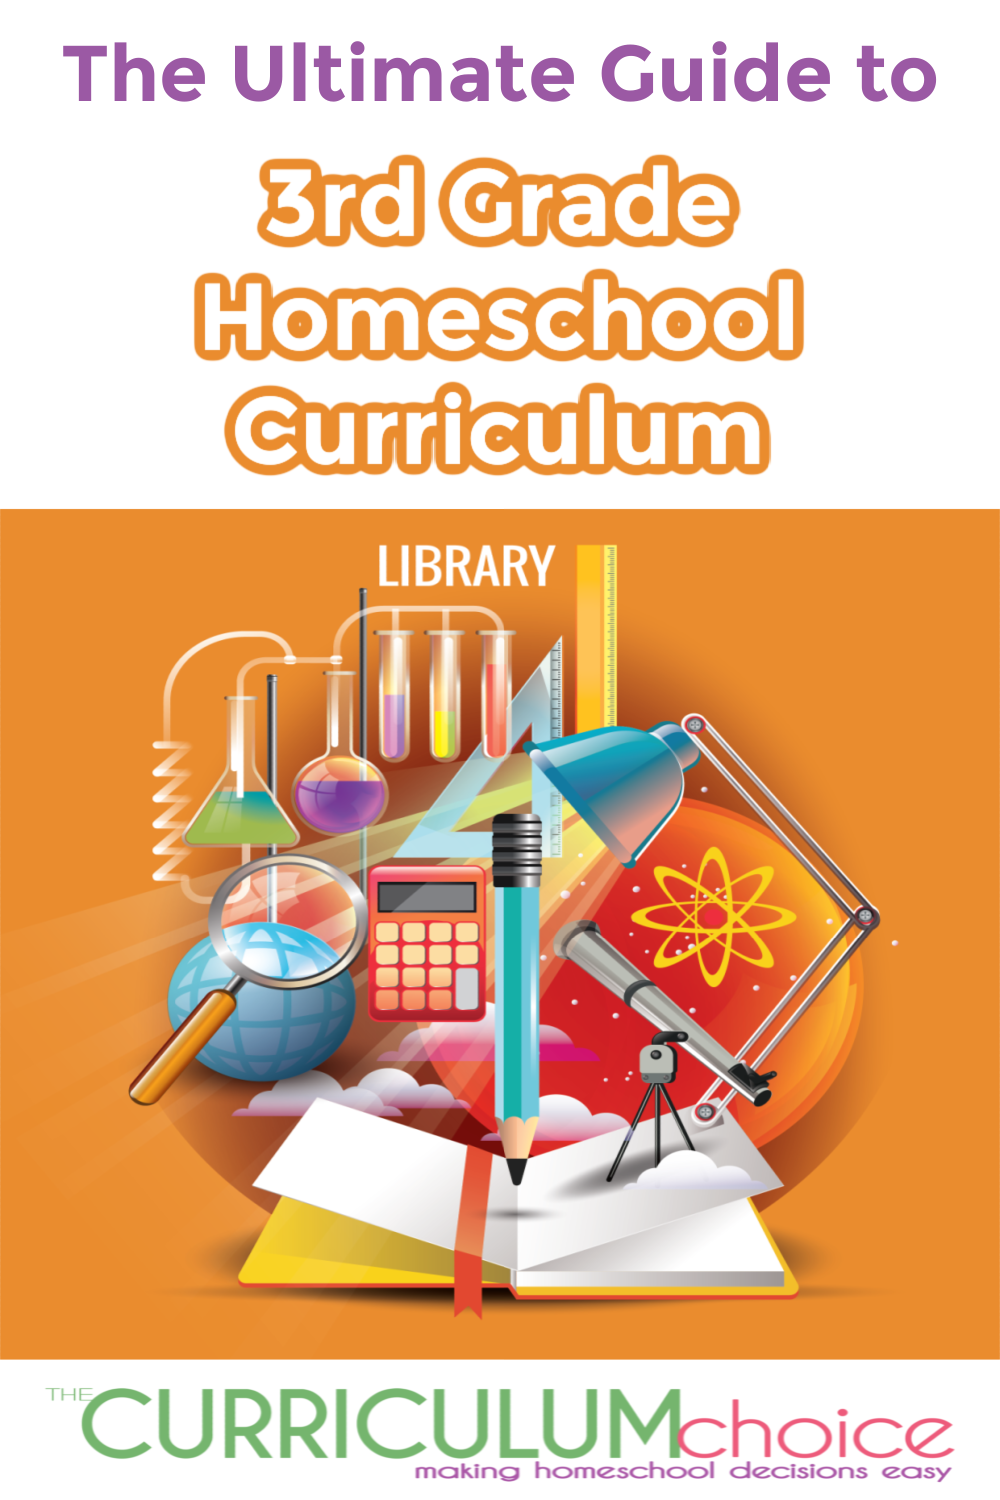 The Ultimate Guide to 3rd Grade Homeschool Curriculum is your go-to reference for full curriculum options, curriculum for individual subjects, as well as ideas for extras such as piano and art for 3rd grade!